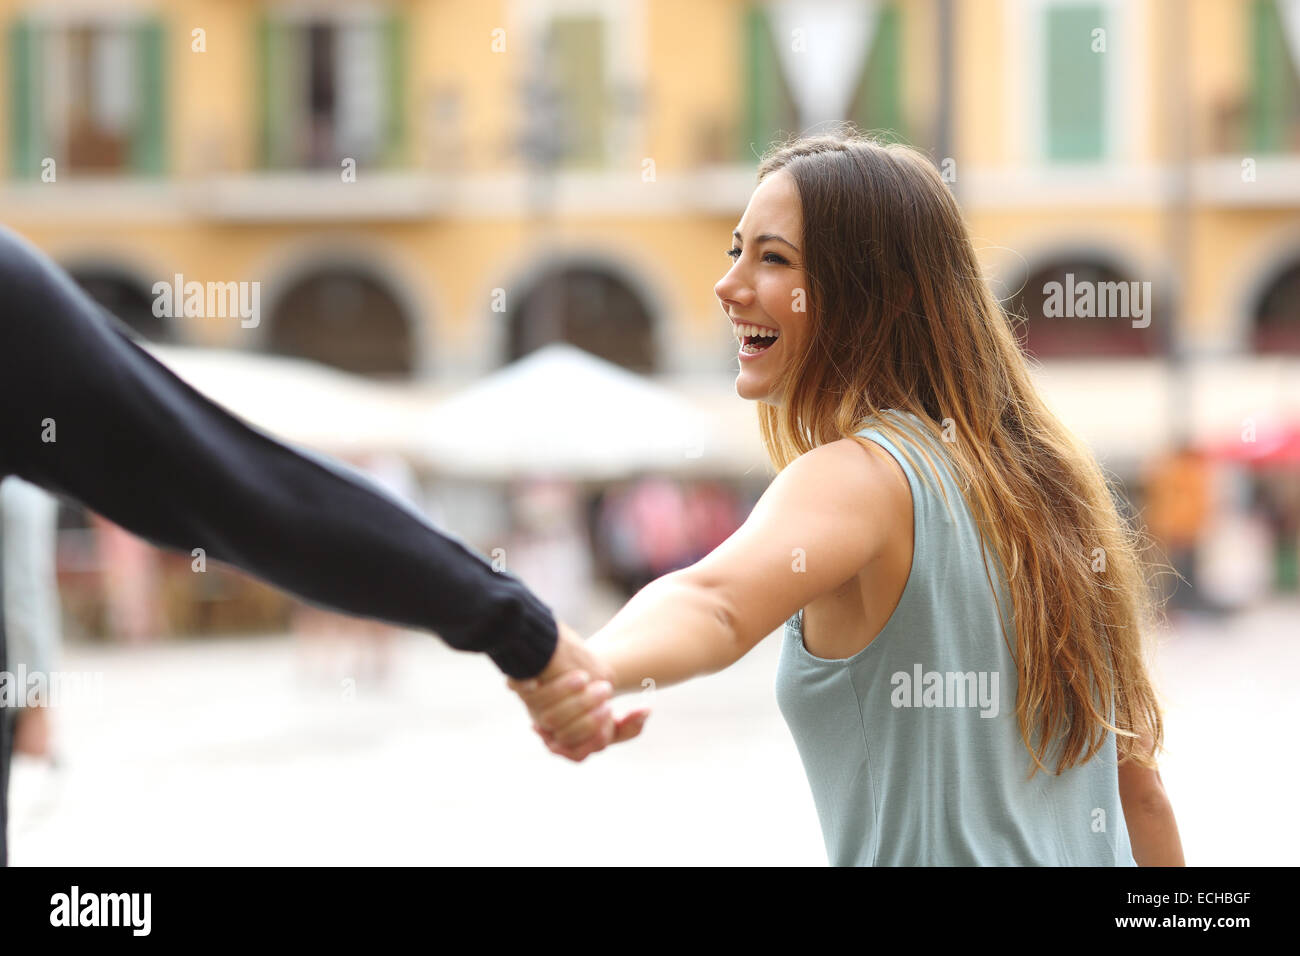 Happy tourist woman laughing and pulling her boyfriend in a touristic place Stock Photo